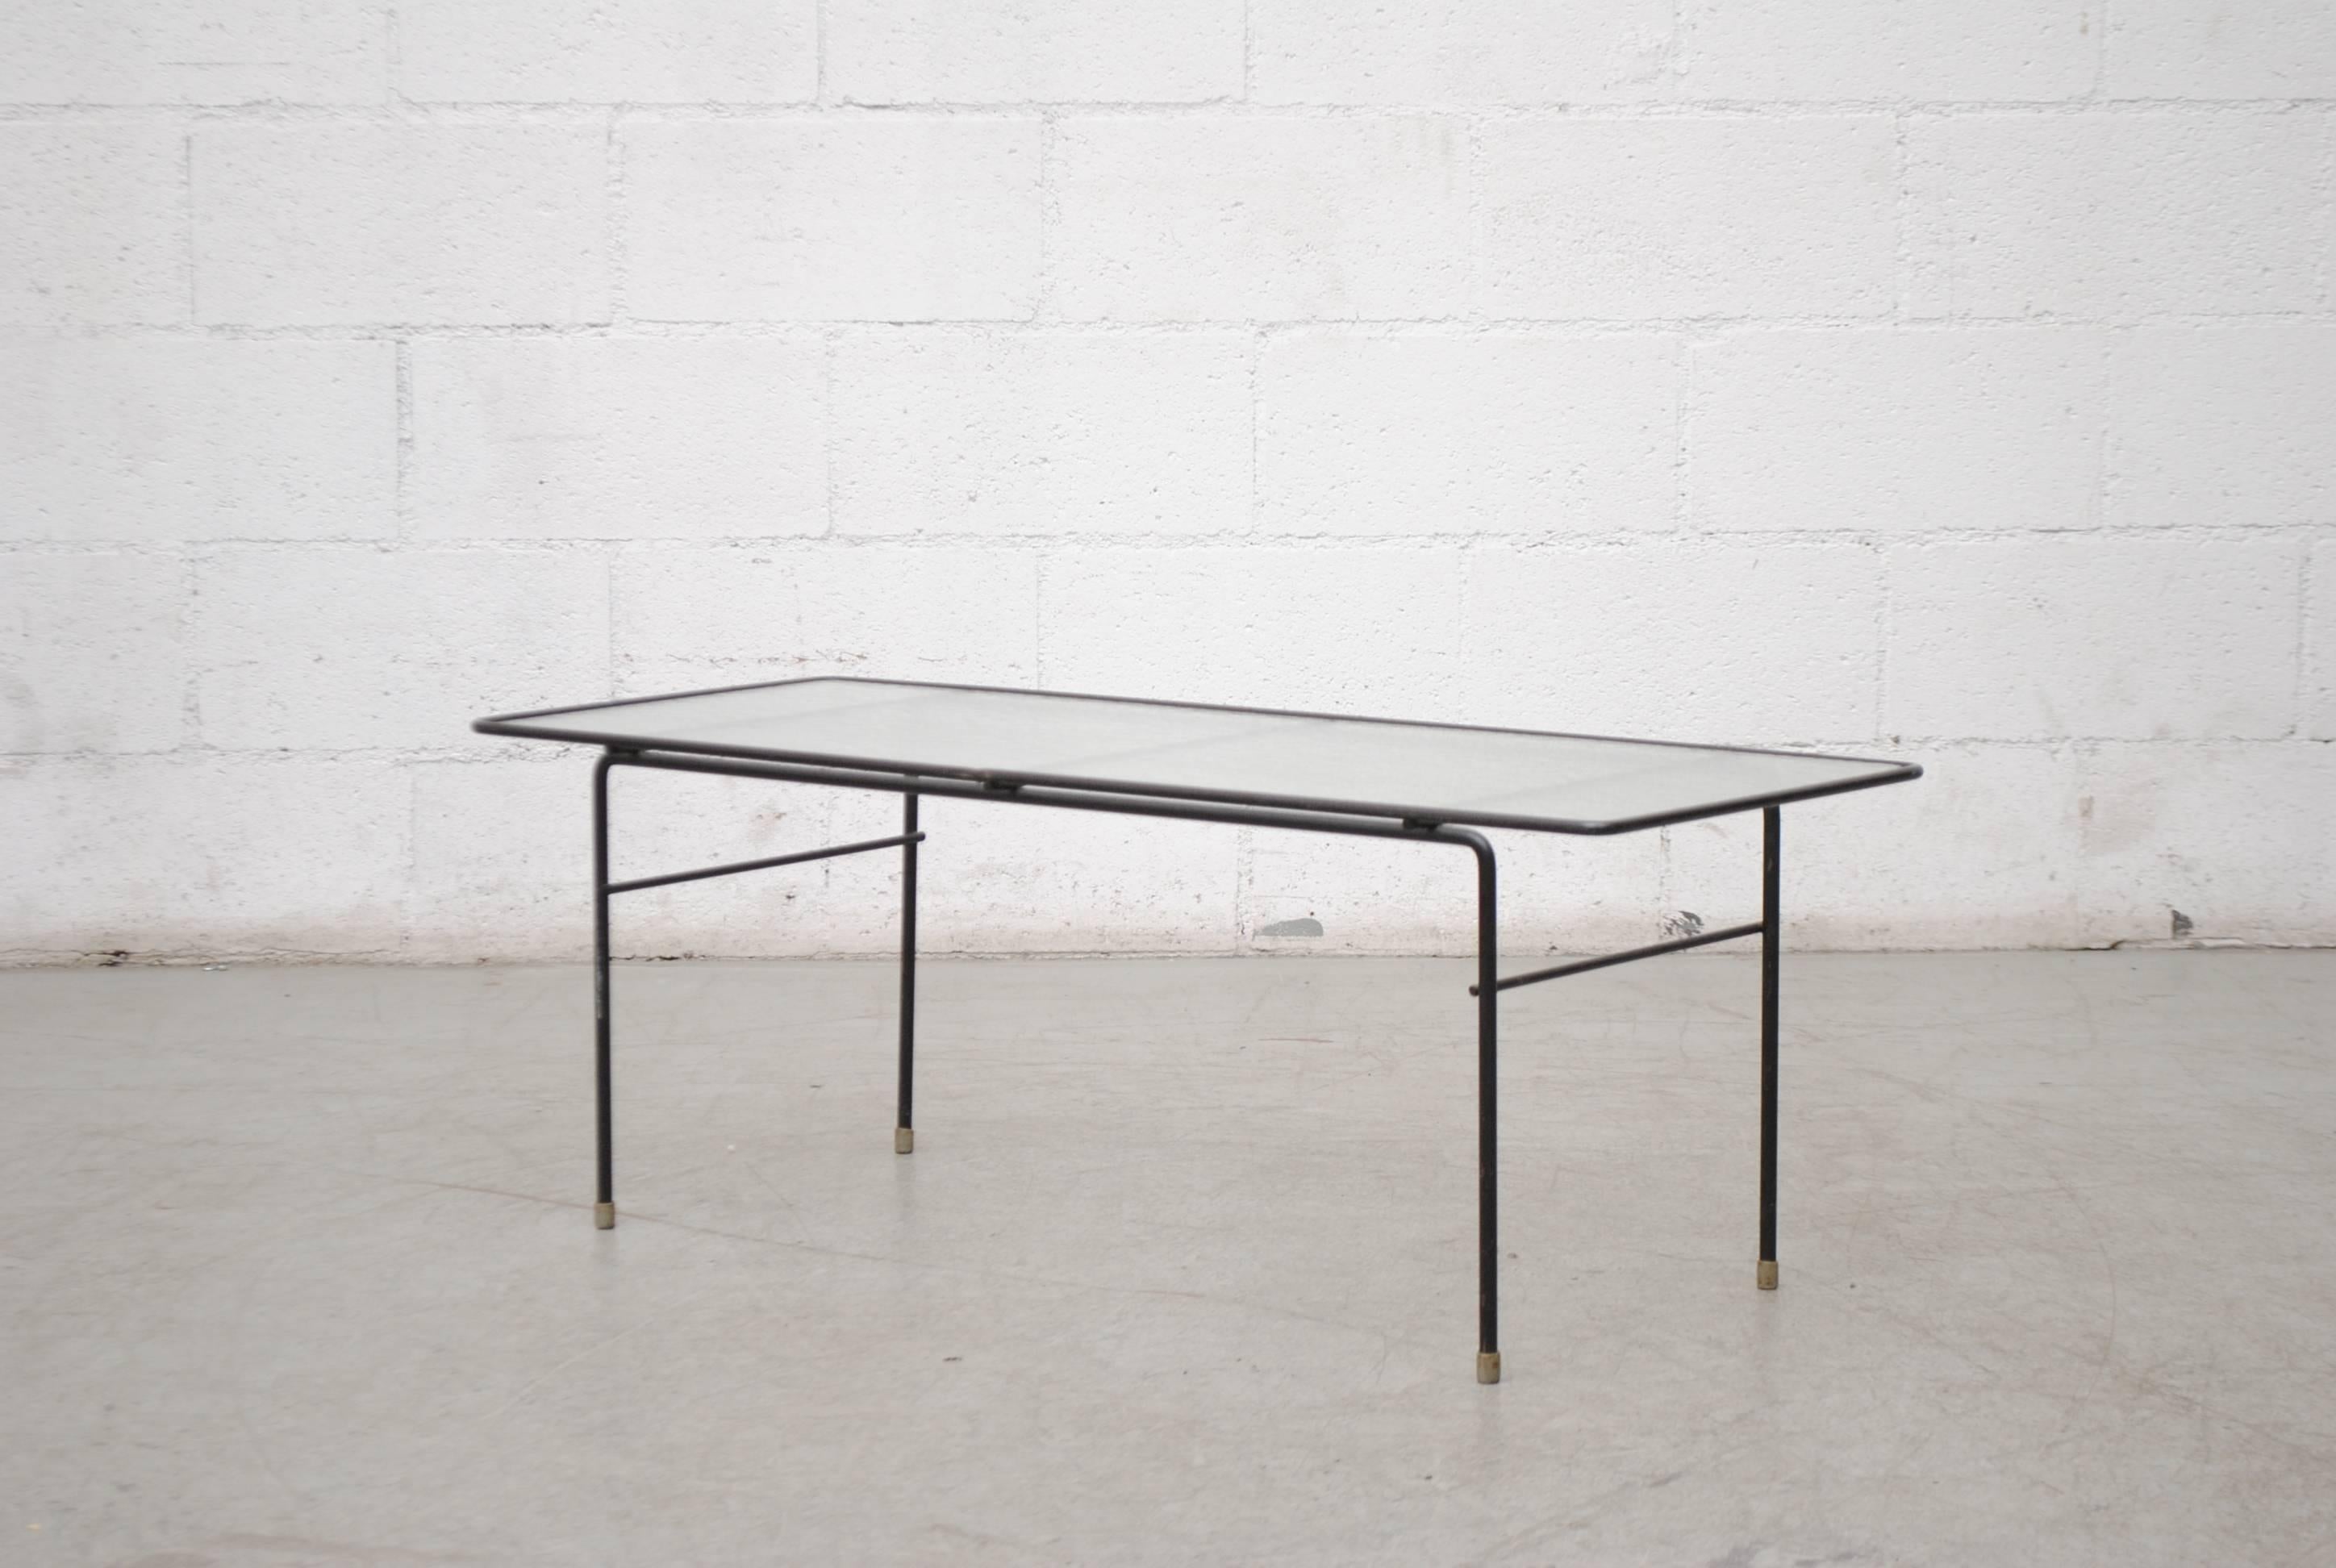 Rare Gispen black enameled metal wired frame coffee table with privacy glass top designed by AR Cordemeyer in original condition with visible wear consistent with its age and usage.